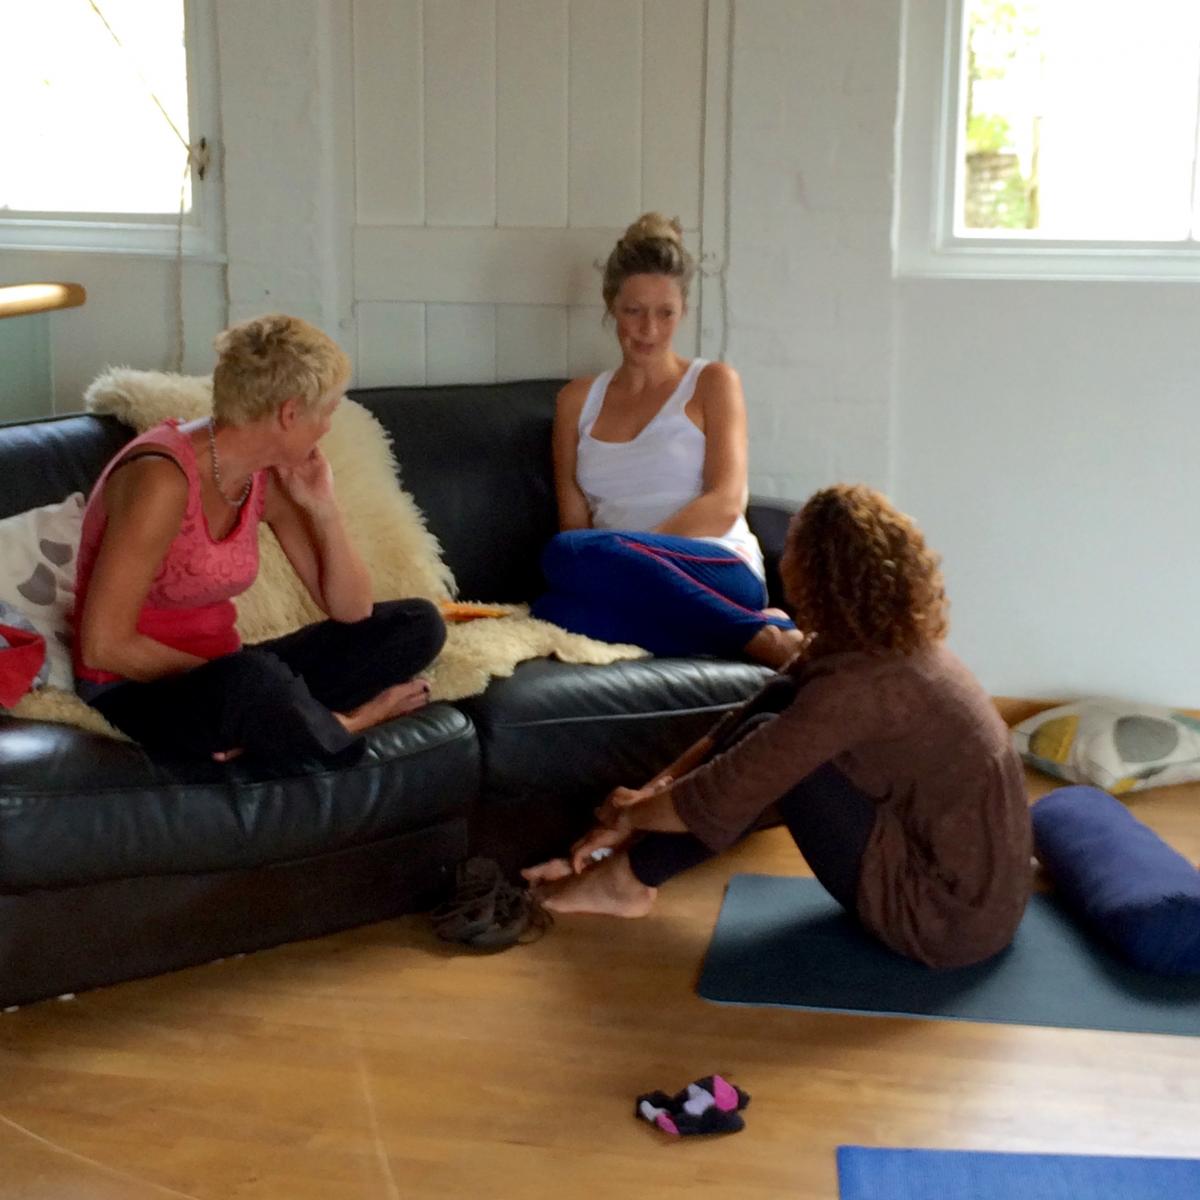 Join a Mamas' Retreat with Story of Mum and Leif Olsen